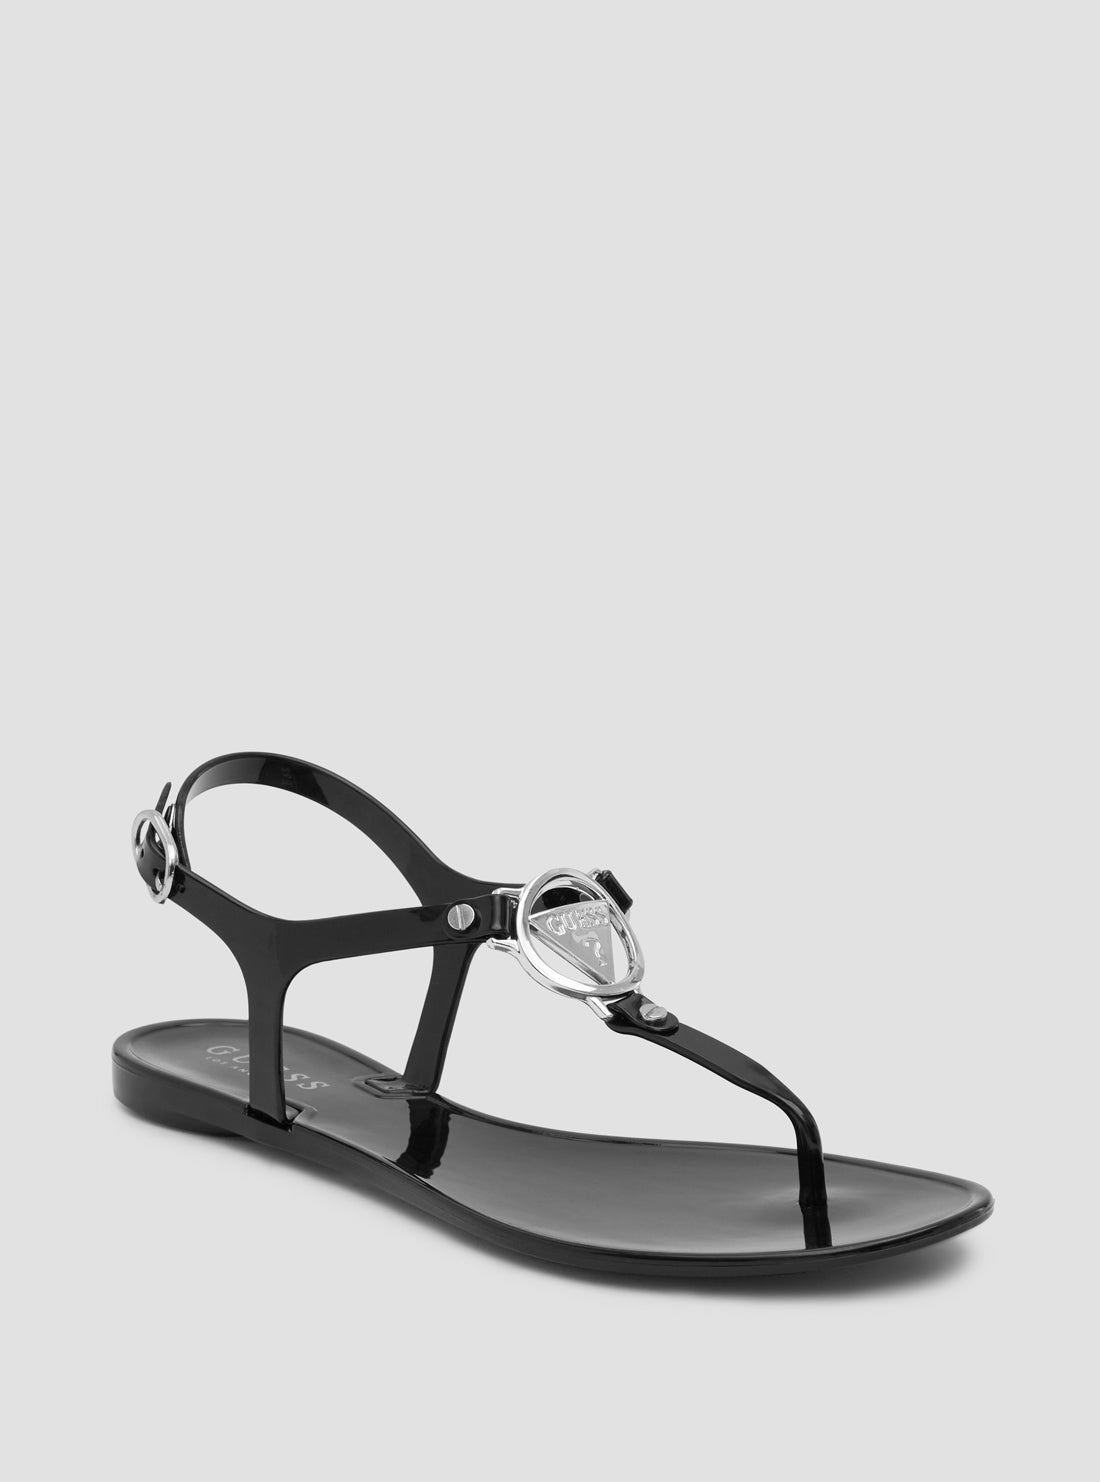 GUESS Women's Black Replace Logo Sandals REPLACE Front View